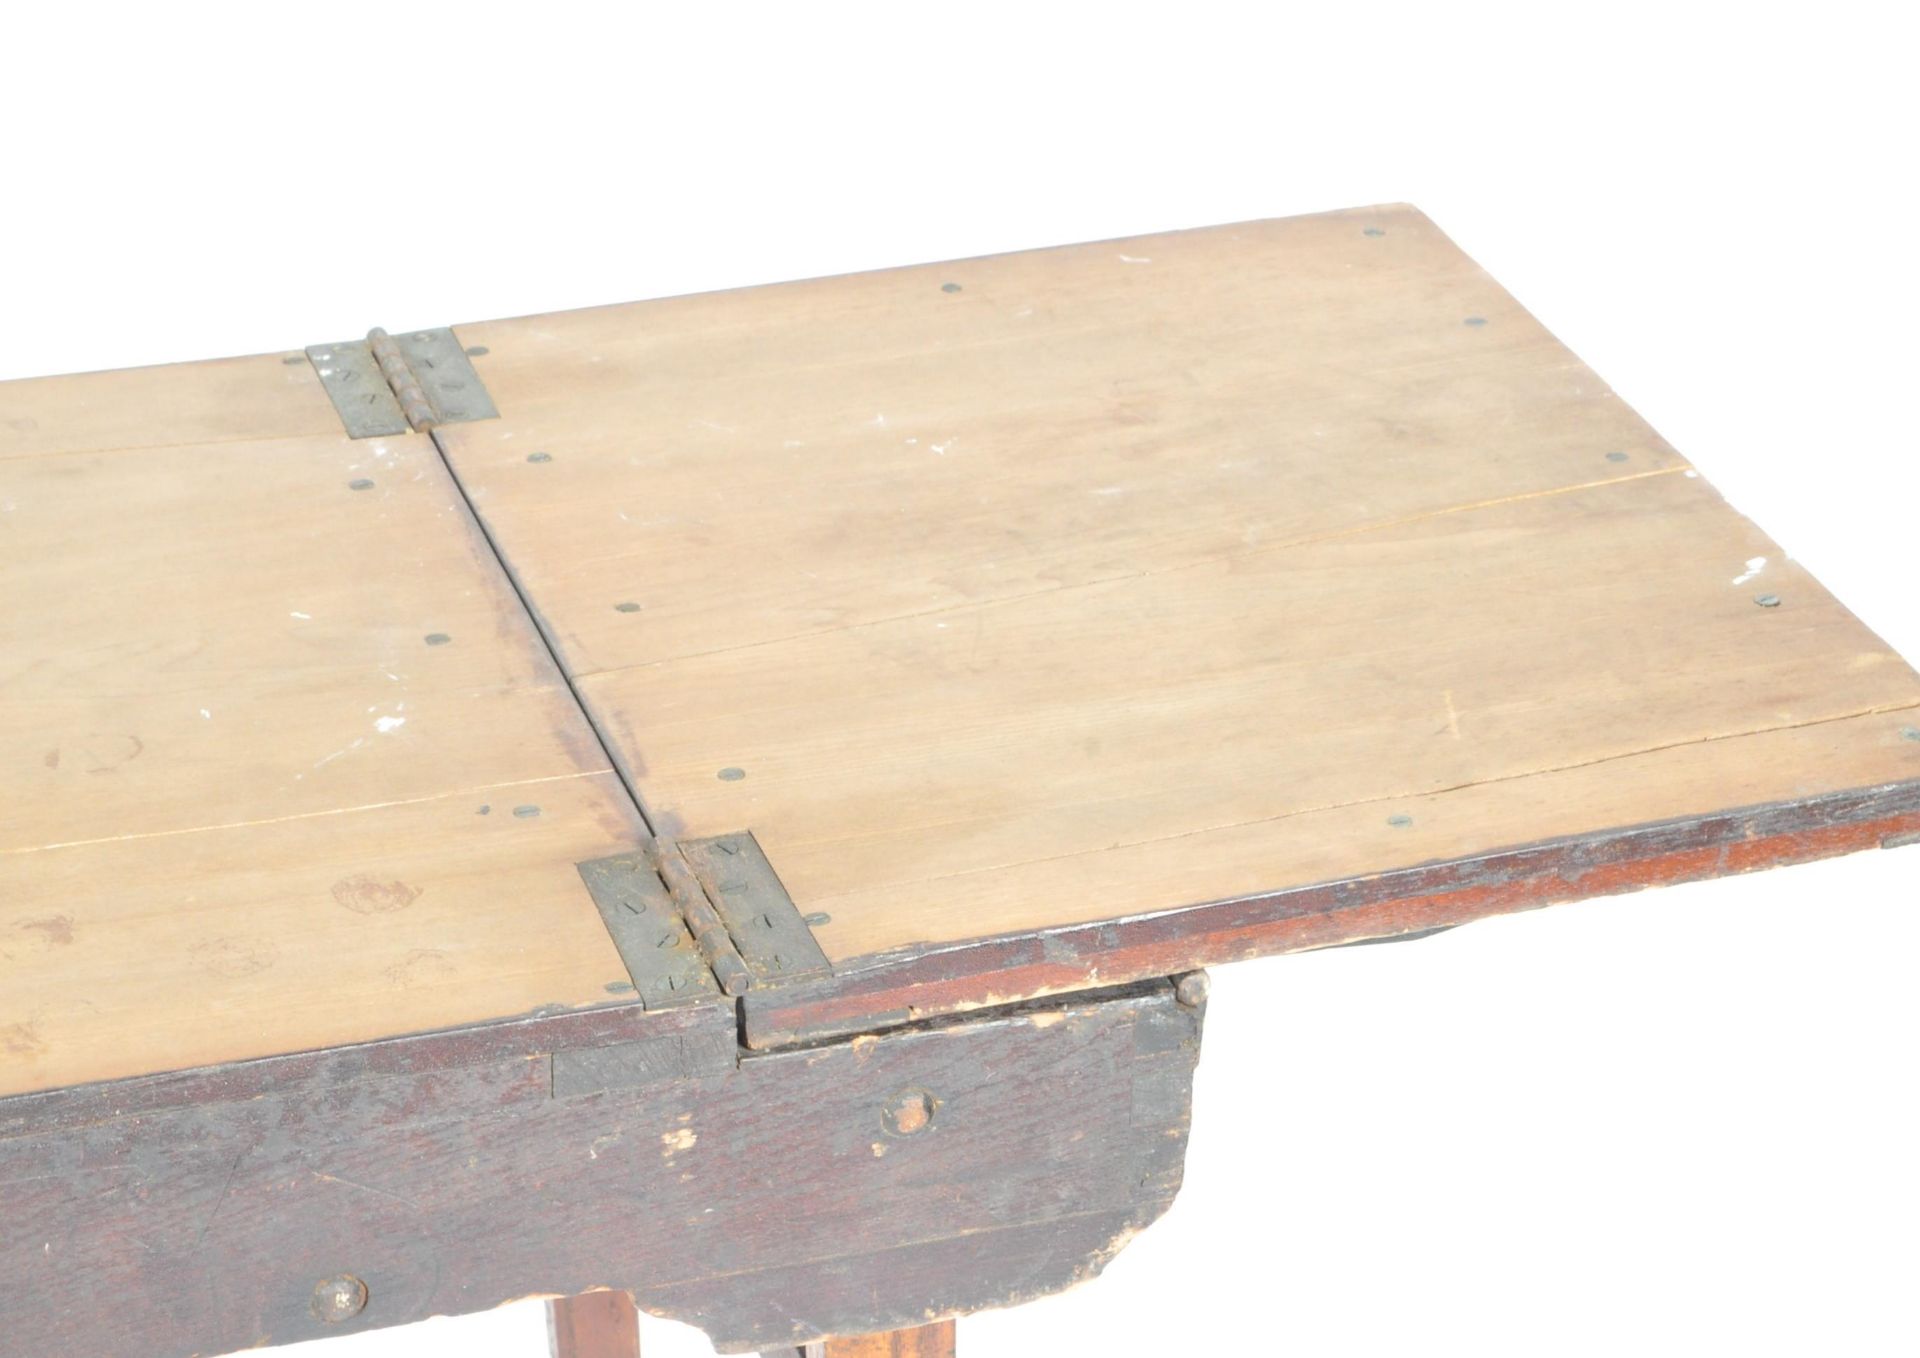 WWI FIRST WORLD WAR SCARCE FIELD SURGEON'S FOLDING OPERATING TABLE - Image 5 of 8